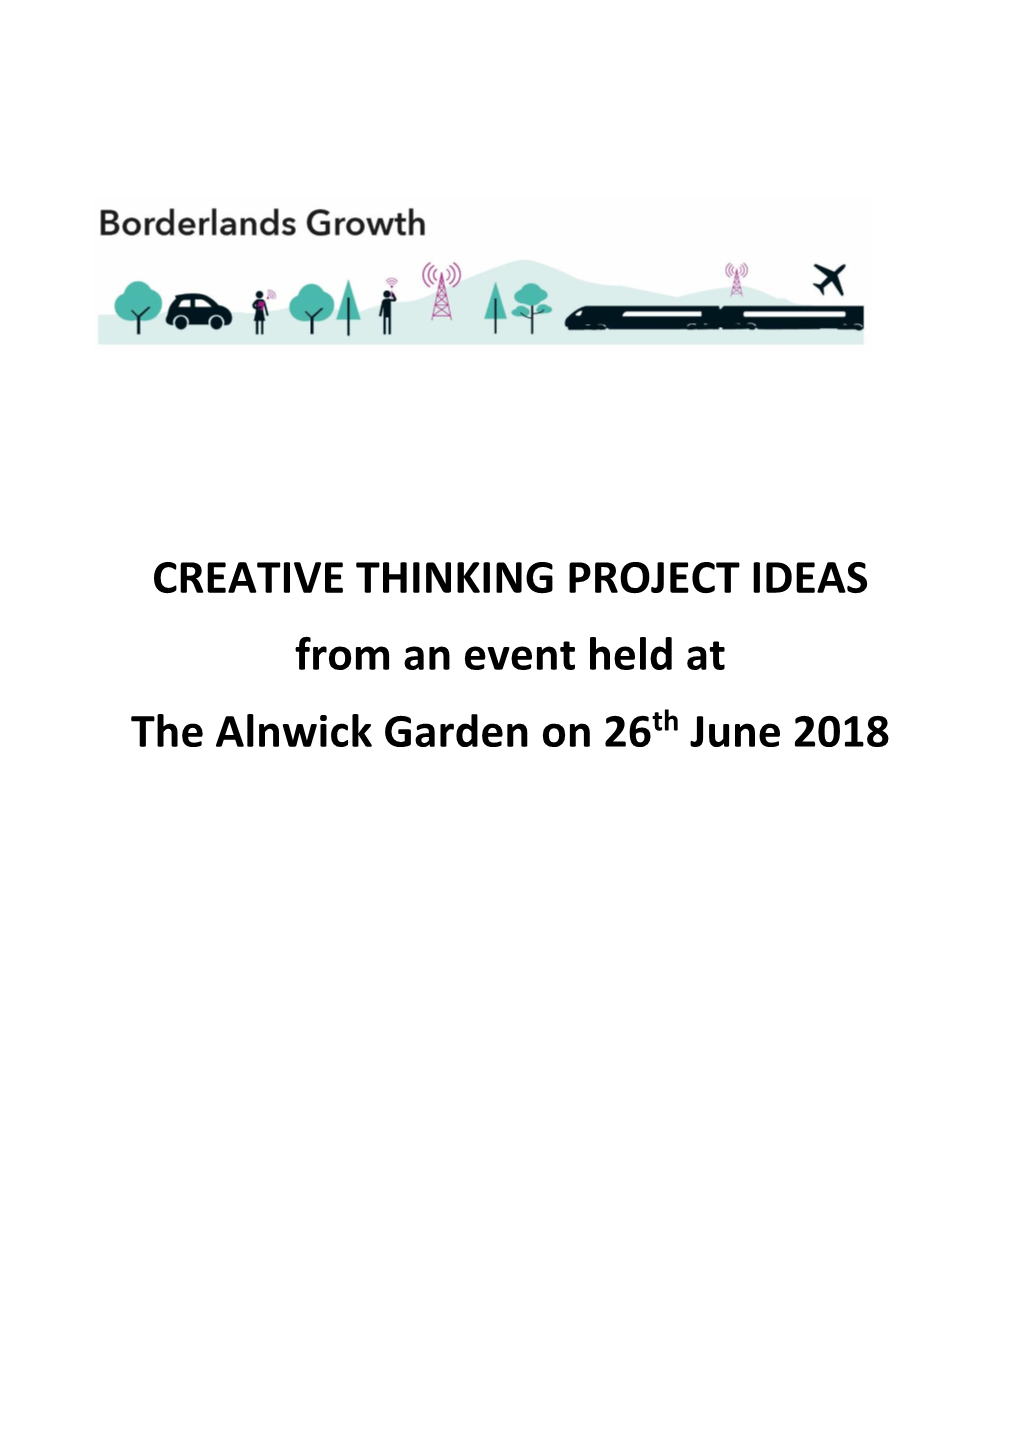 CREATIVE THINKING PROJECT IDEAS from an Event Held at the Alnwick Garden on 26Th June 2018